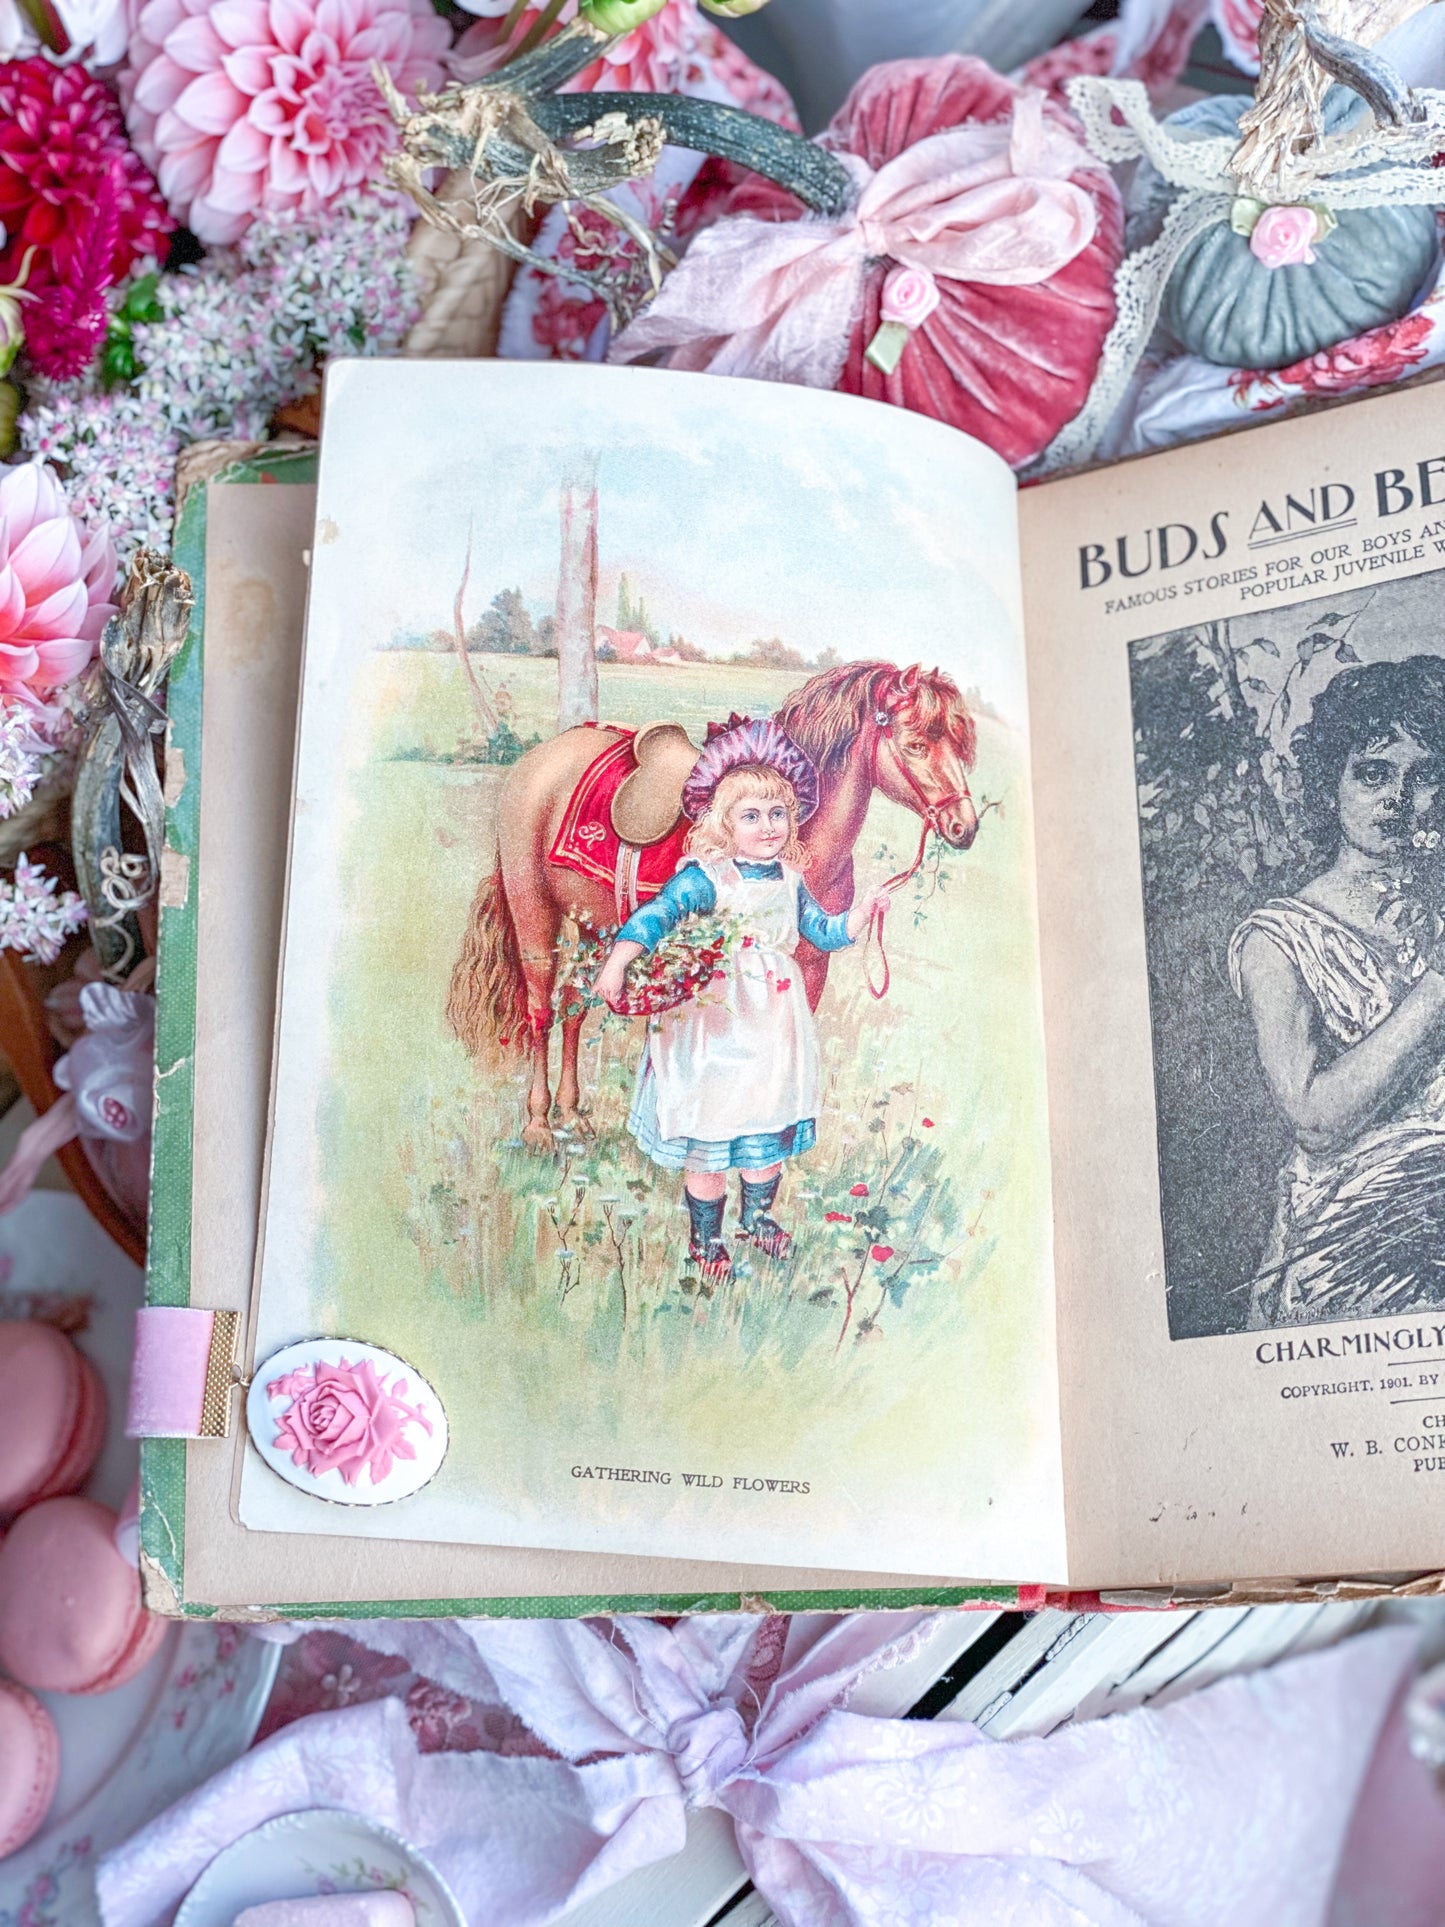 Buds and Beauties - Vintage Children’s Book